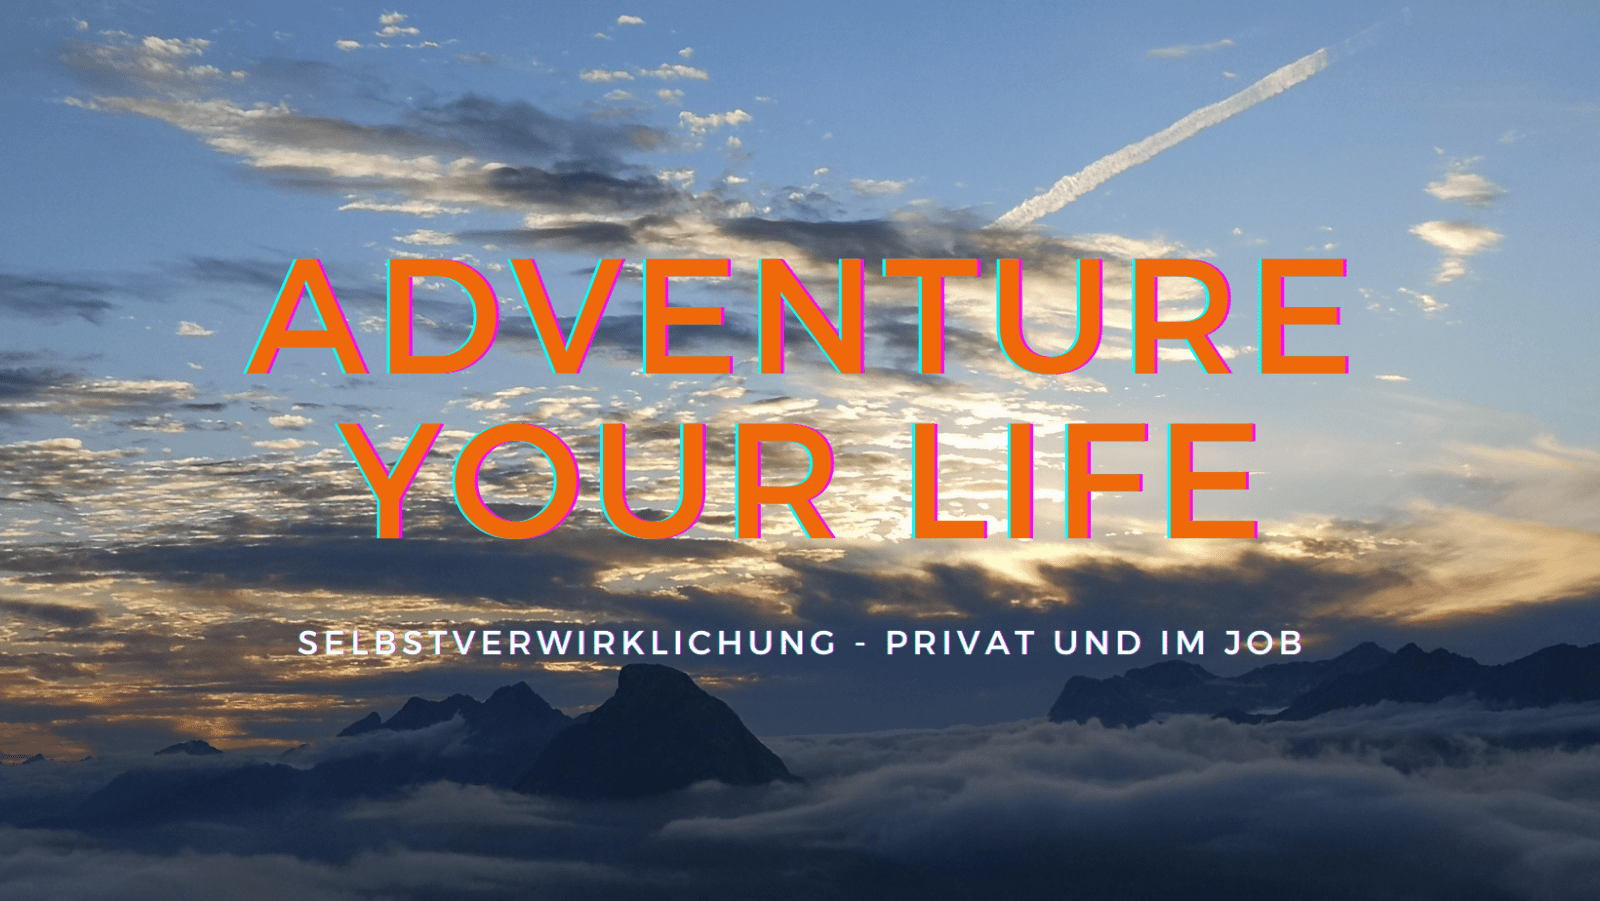 adventure-your-life by conny schumacher